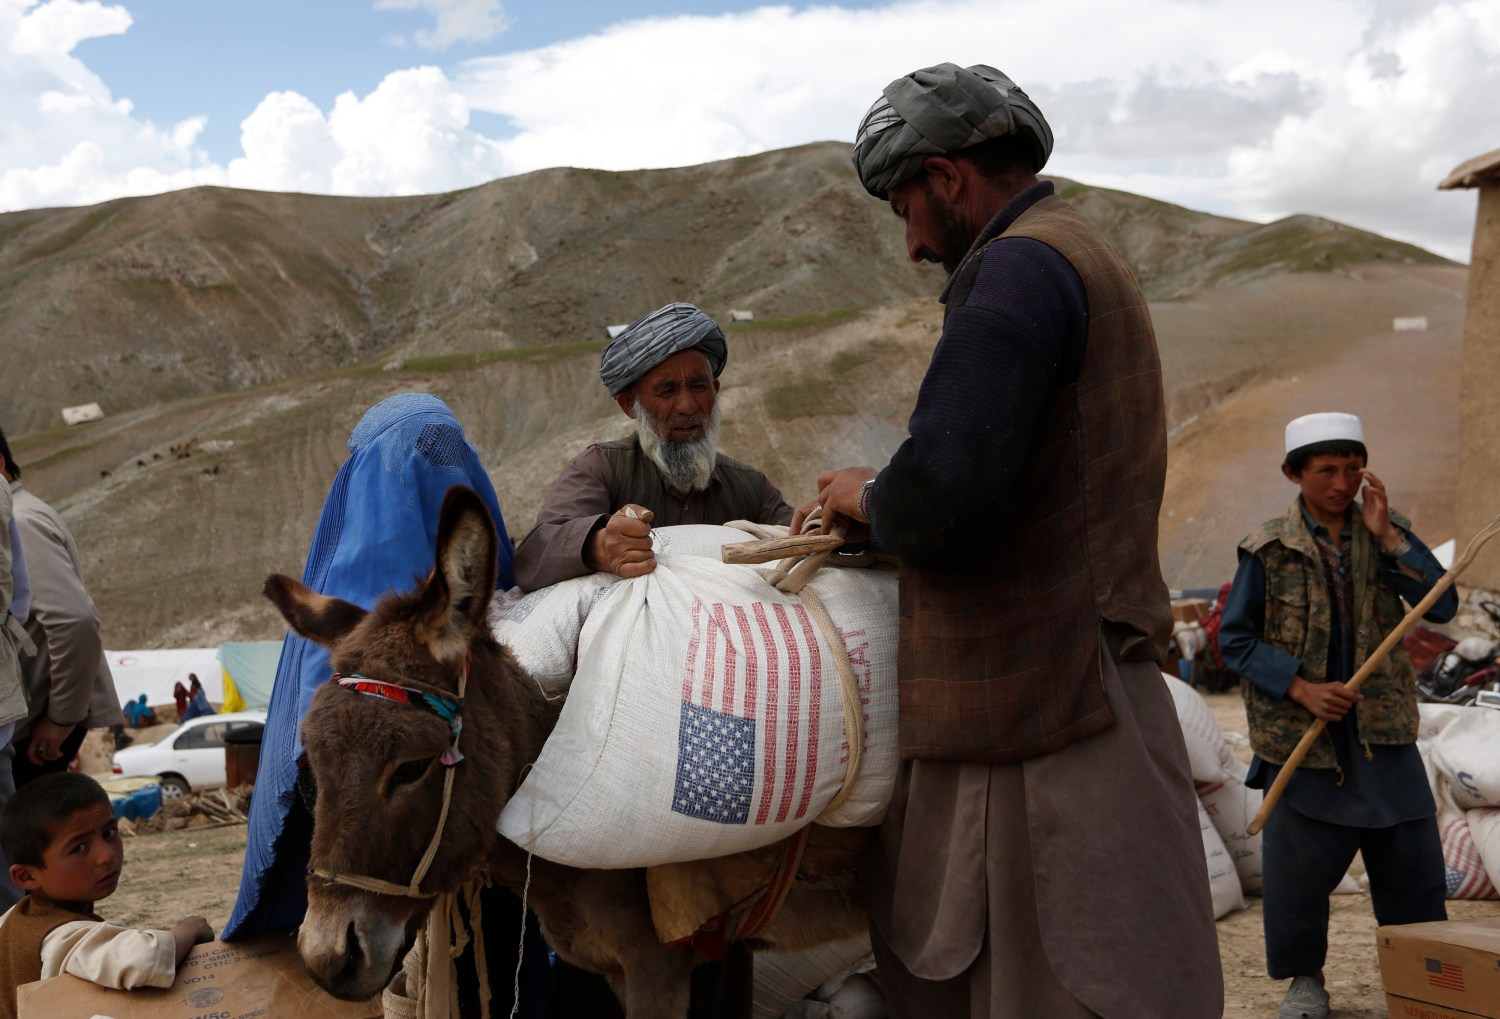 Displaced Afghans load aid near the site of a landslide at the Argo district in Badakhshan province May 5, 2014. Grief-stricken and desititute Afghan villagers vented anger with their government as they scrambled for emergency aid, three days after deadly landslides engulfed their homes. Some 300 homes in Aab Bareek, a village in the Argo district of Badakhshan, a remote and mountainous northeastern province, were buried under up to 50 metres of earth and debris. REUTERS/Mohammad Ismail (AFGHANISTAN - Tags: DISASTER) - GM1EA56055K01